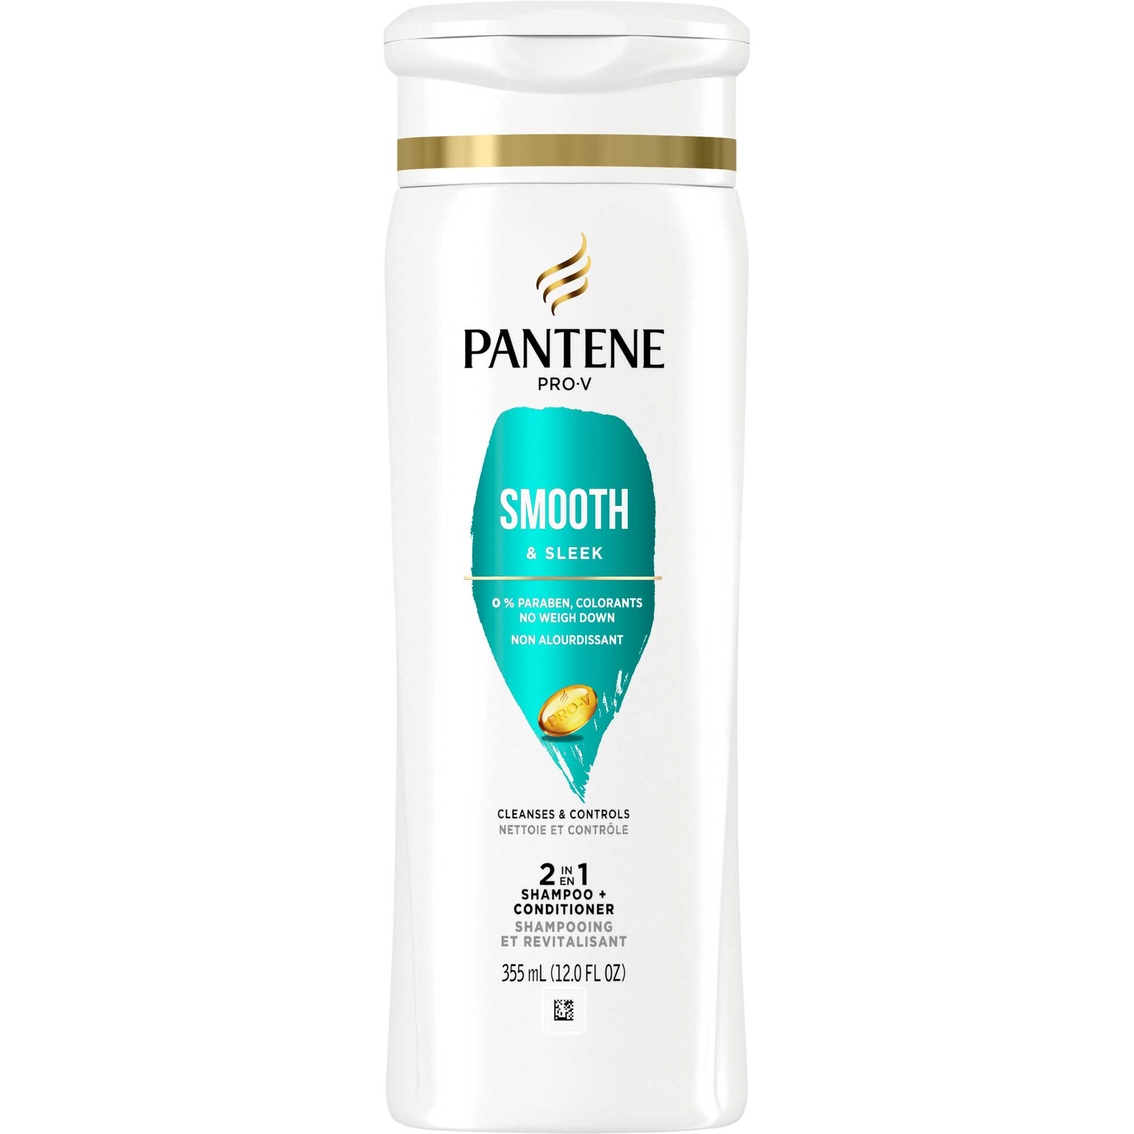 Pantene Pro V Smooth and Sleek 2 in 1 Shampoo and Conditioner 12 oz.